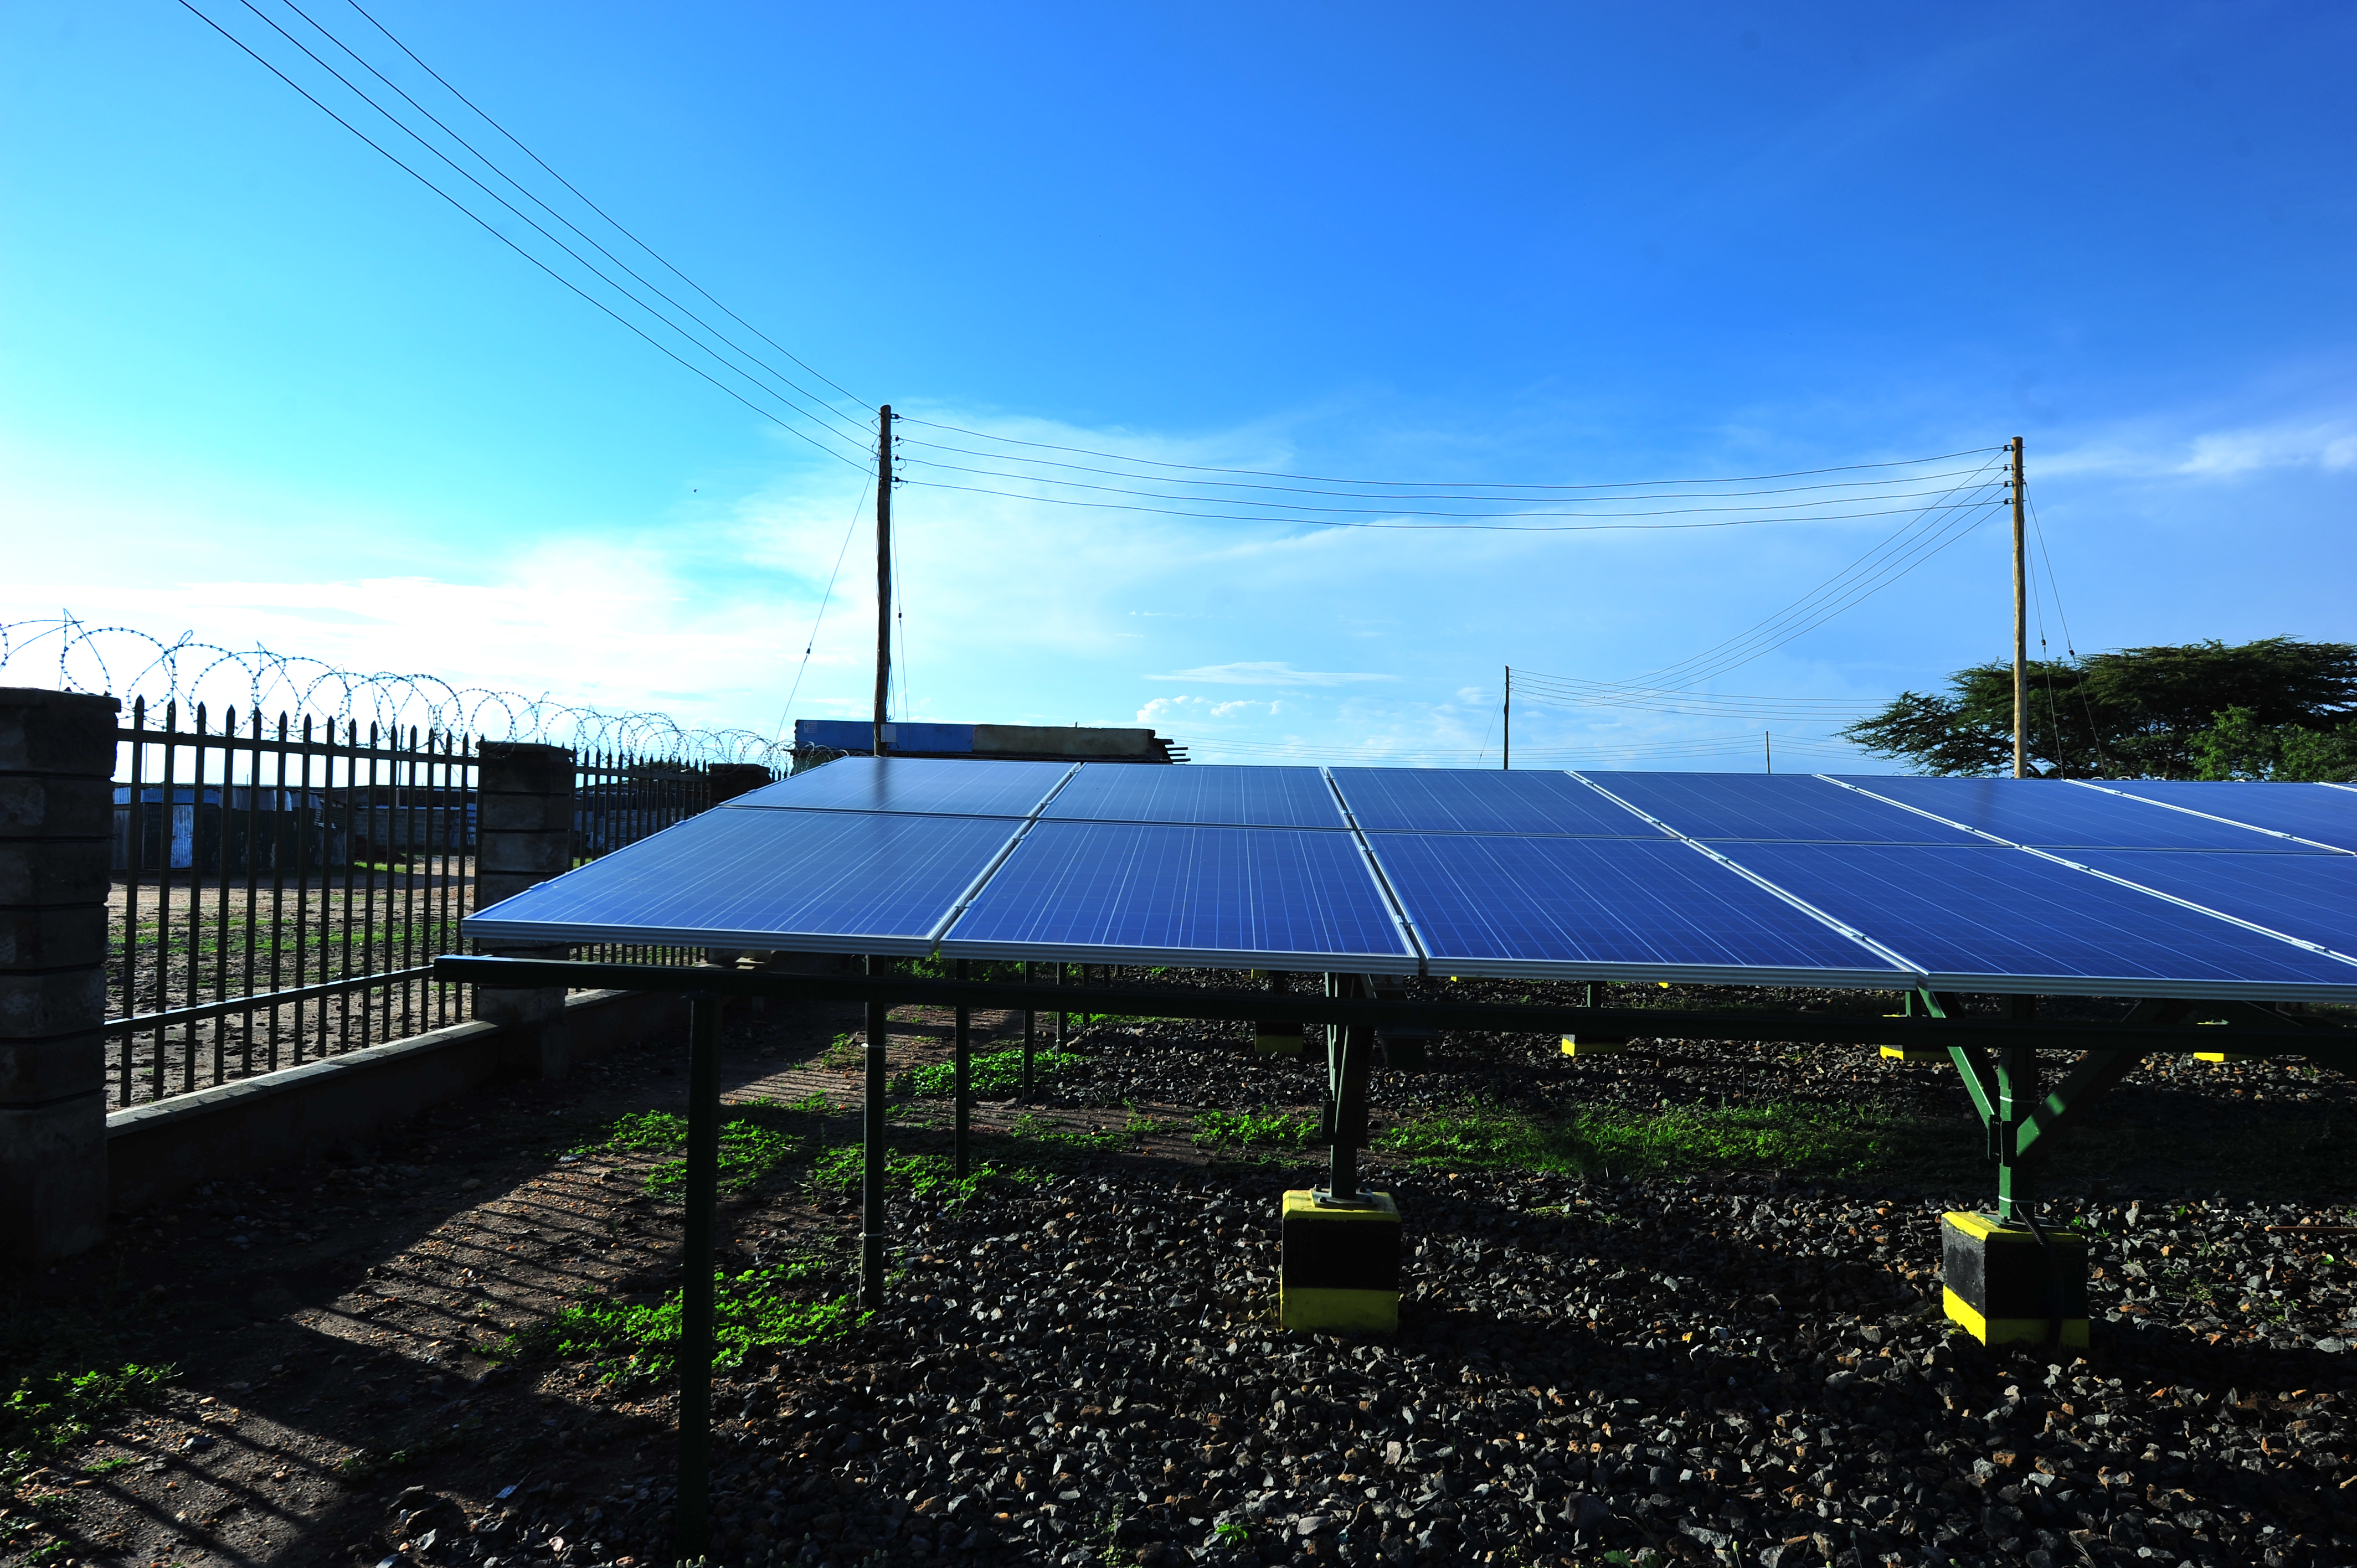 A view of solar panels and distribution lines at Talek Solar Power plant in Talek, Narok County. GIZ and other partners constructed  the power plant which will connect residents of Talek town to power for domestic and commercial use.